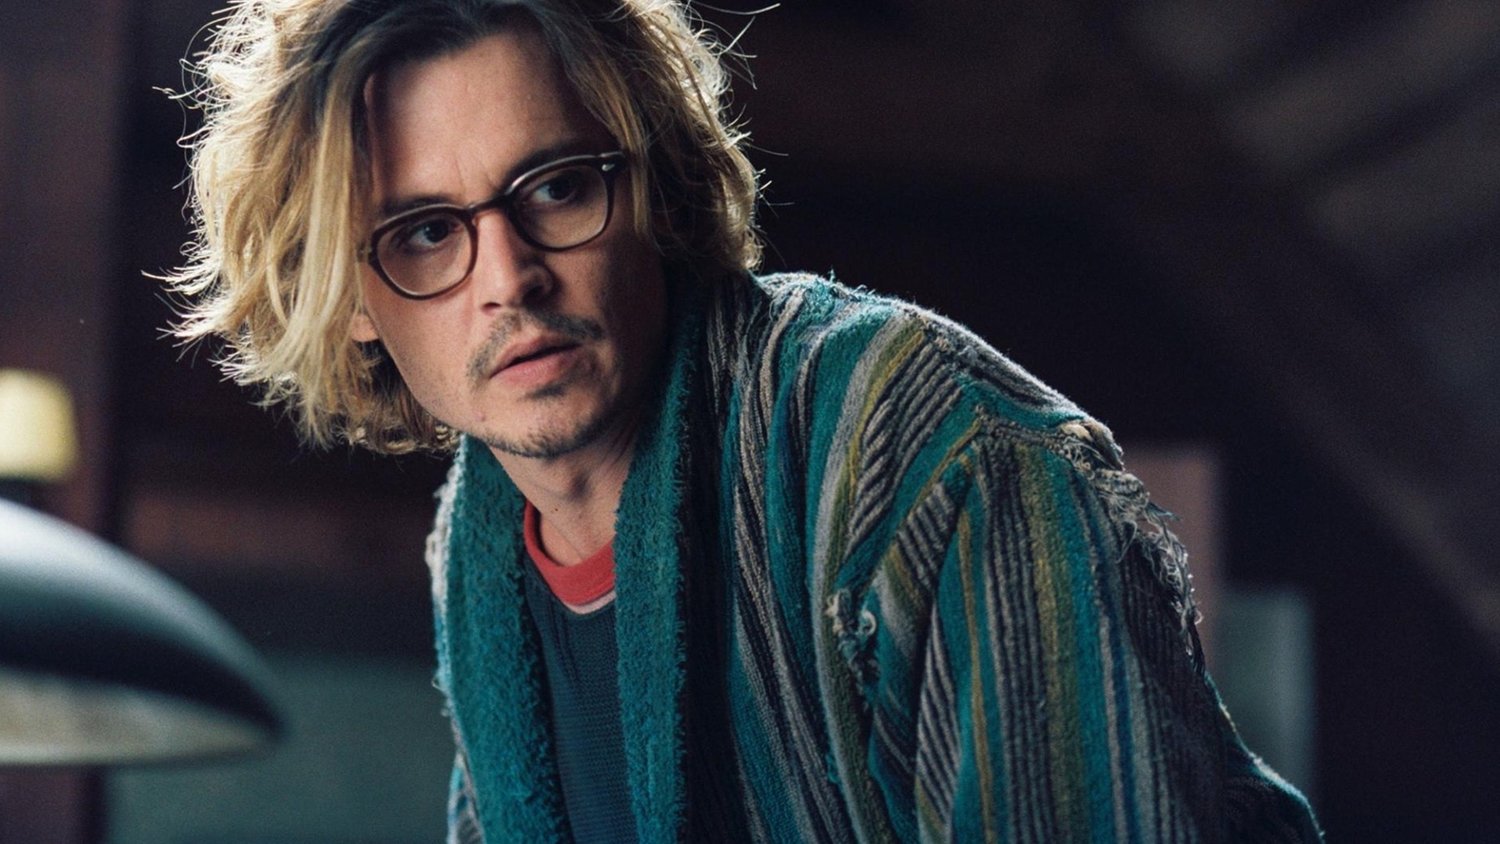 Which film marked Johnny Depp's first collaboration with director Tim Burton?